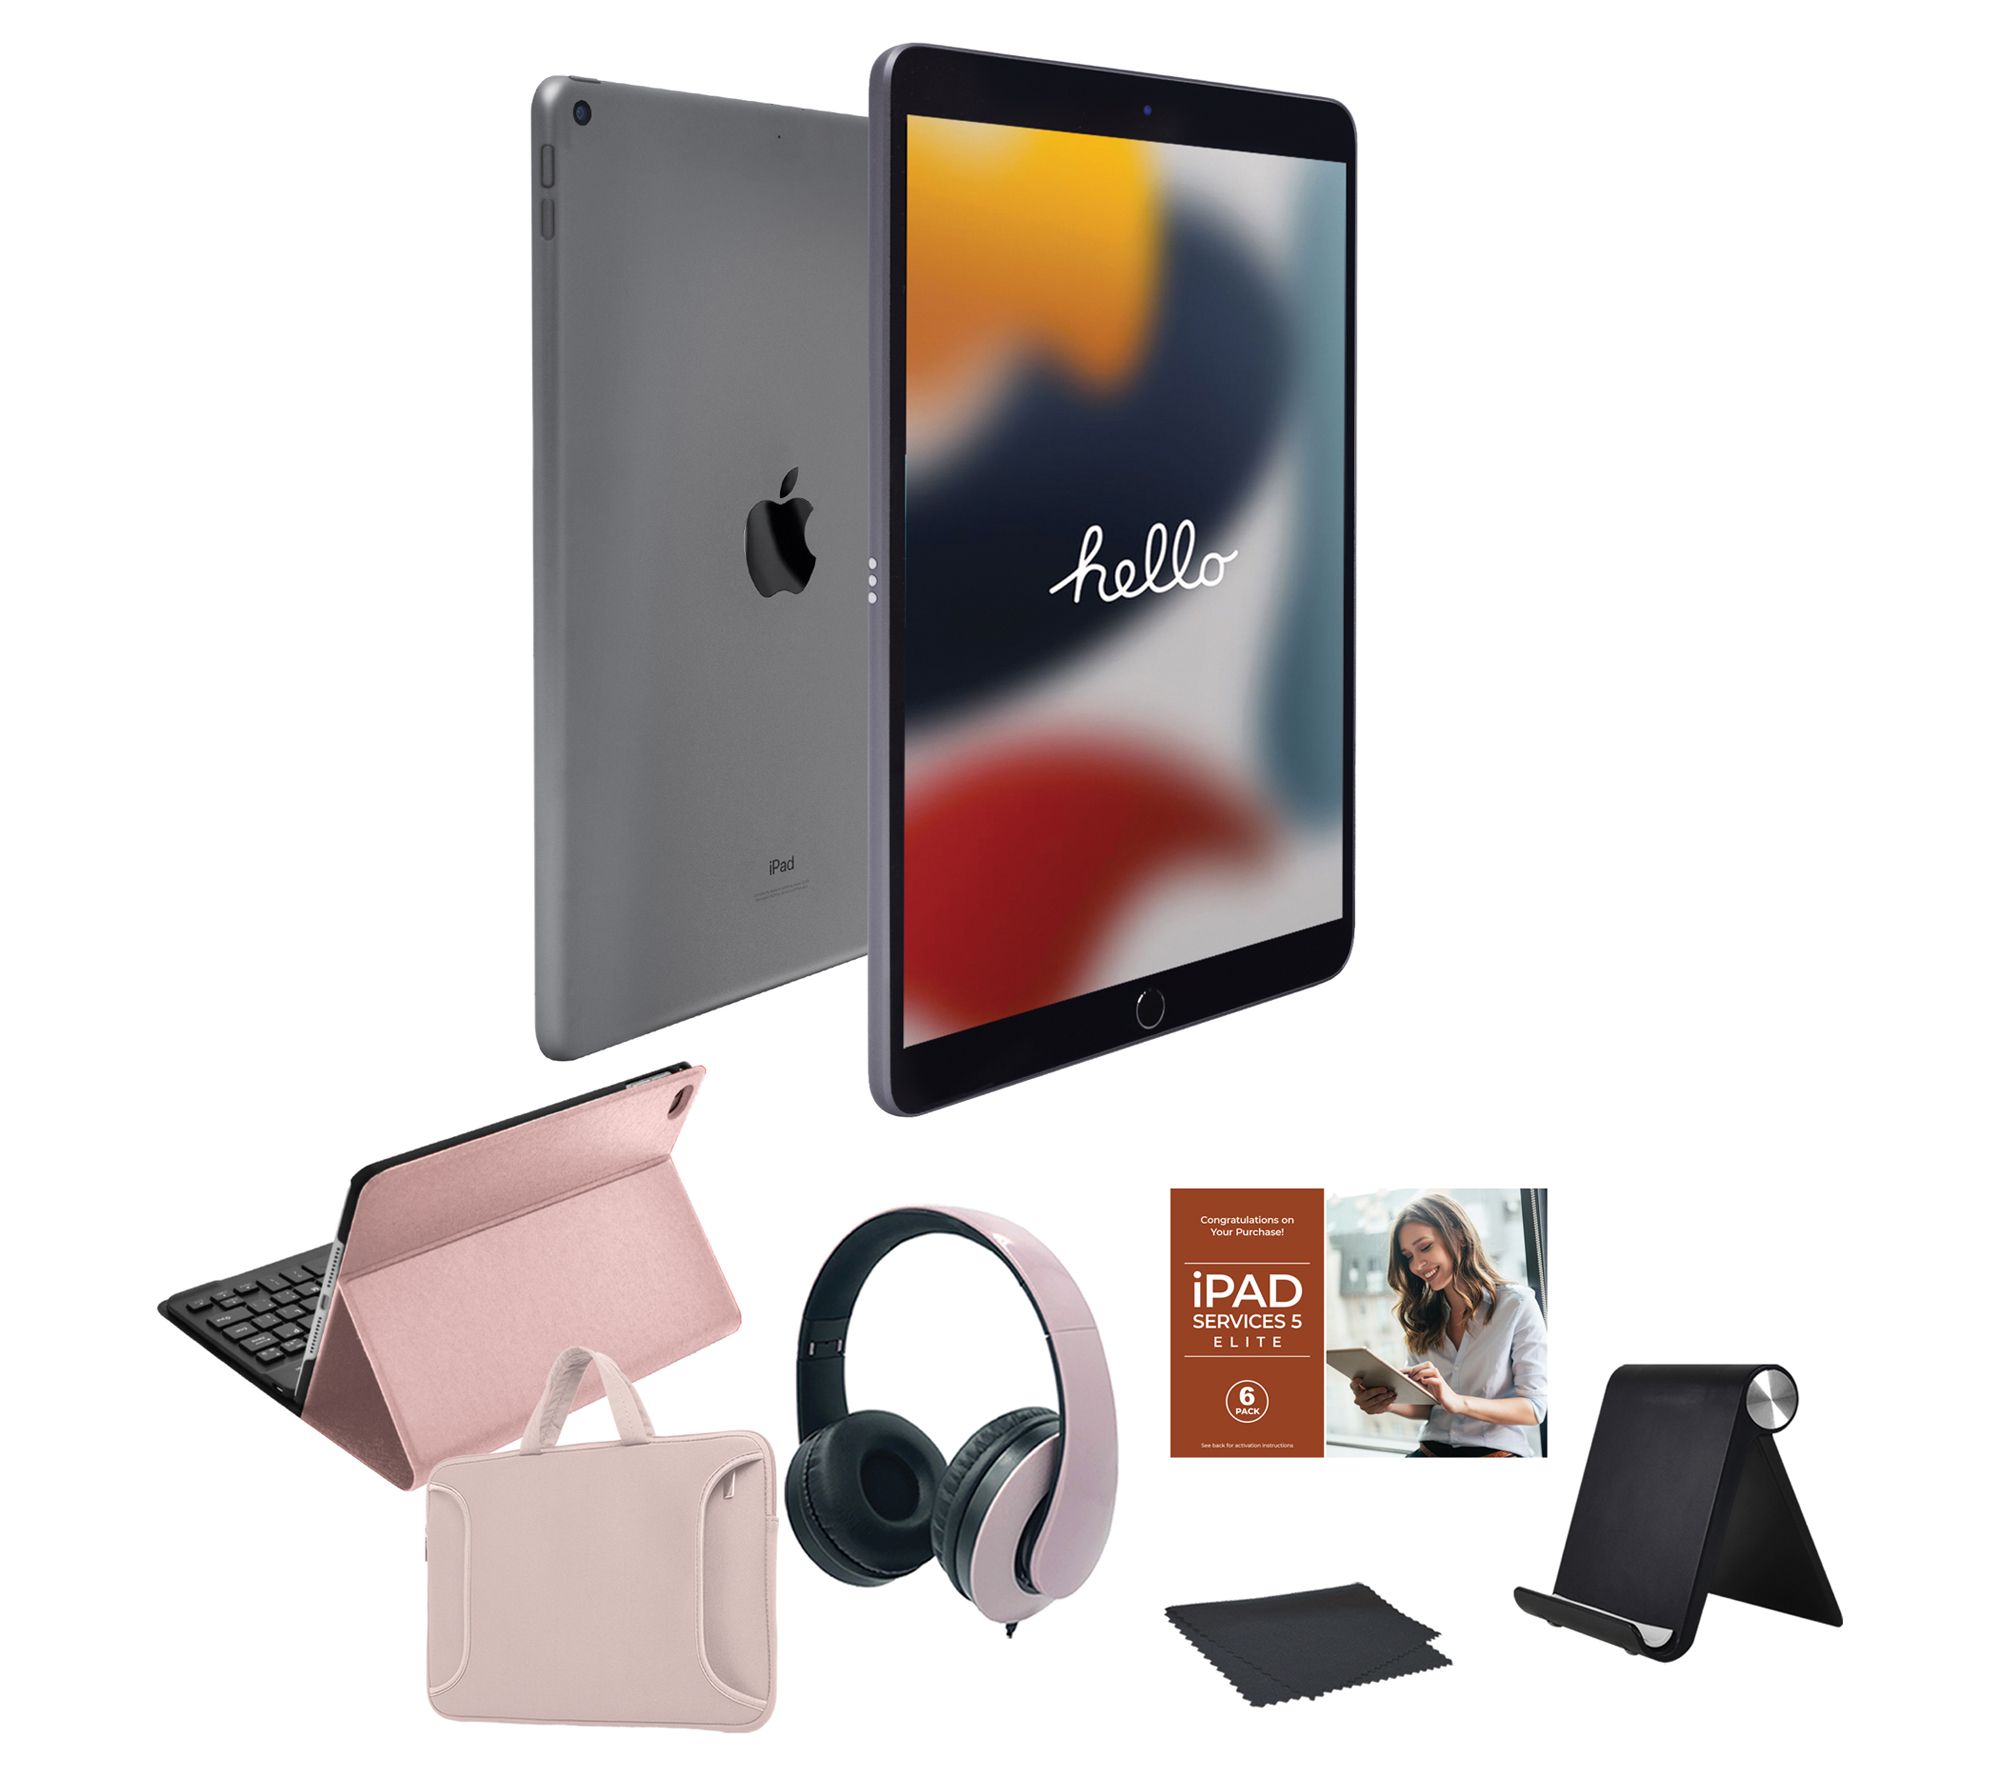 Apple iPad 9th Gen 10.2 64GB Wi-Fi with Voucher and Accessories